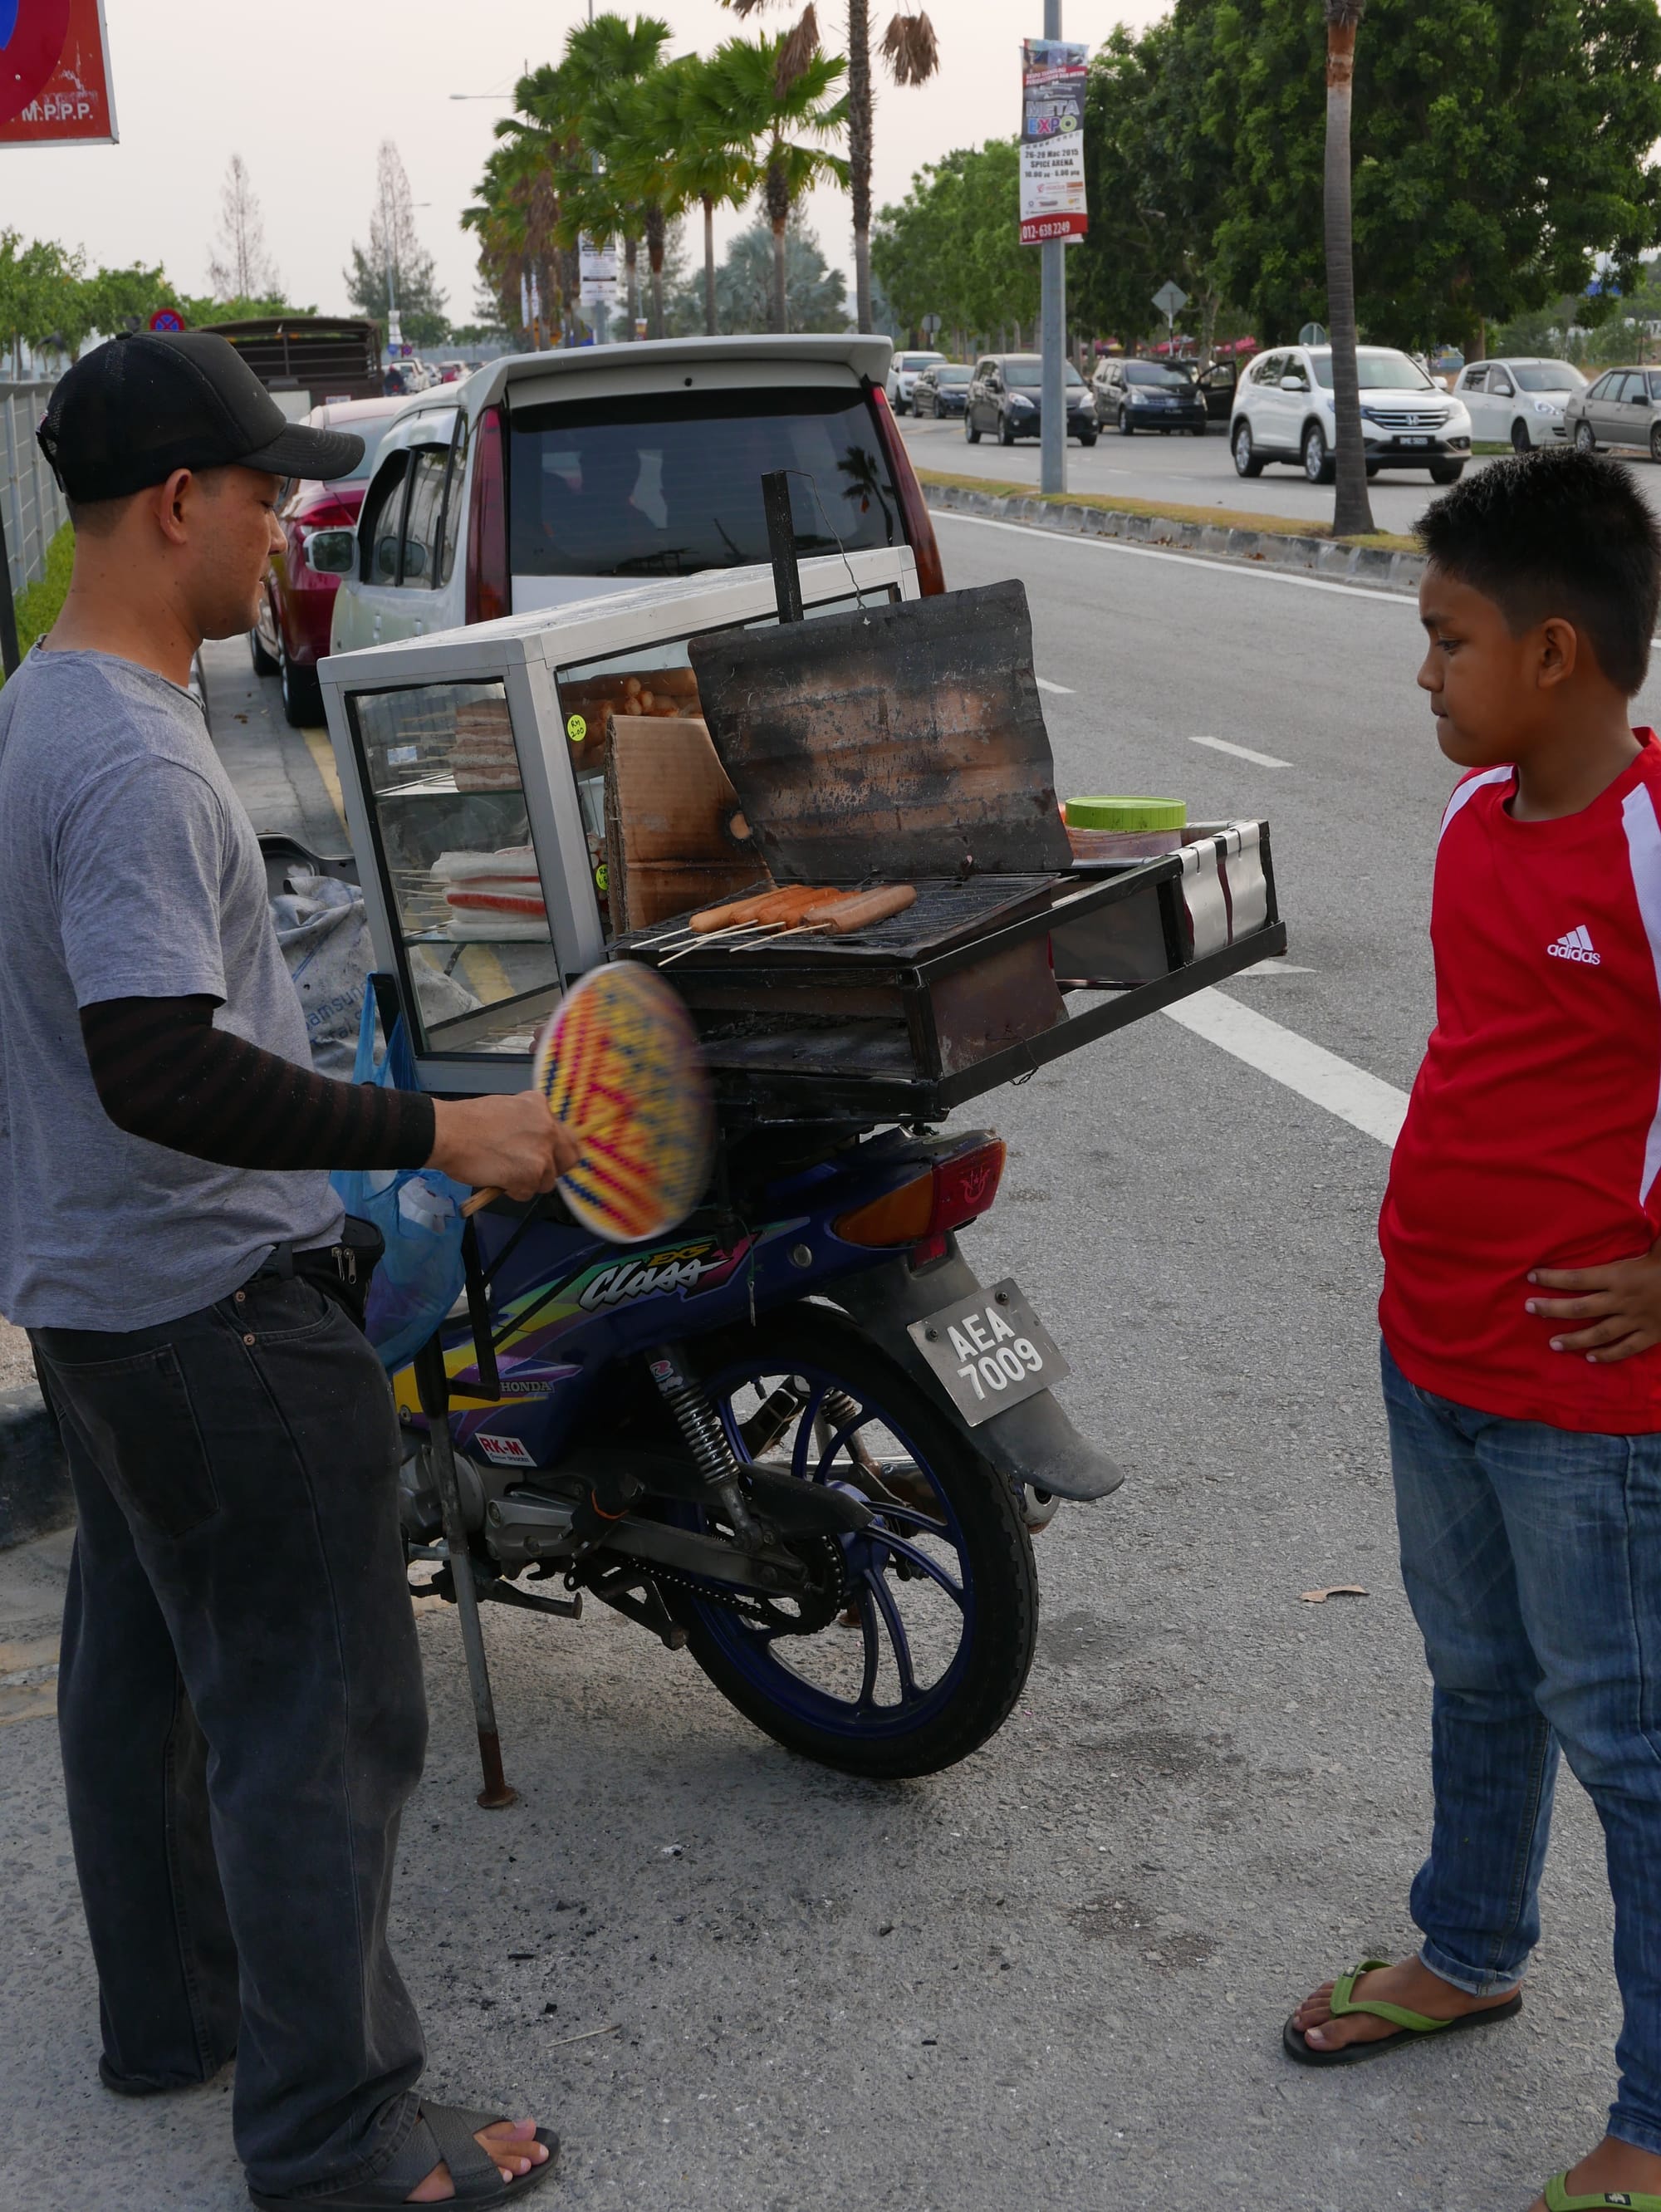 Photo by Author — motorbike hot food seller — Queensbay Seaside, Bayan Lepas, Penang, Malaysia